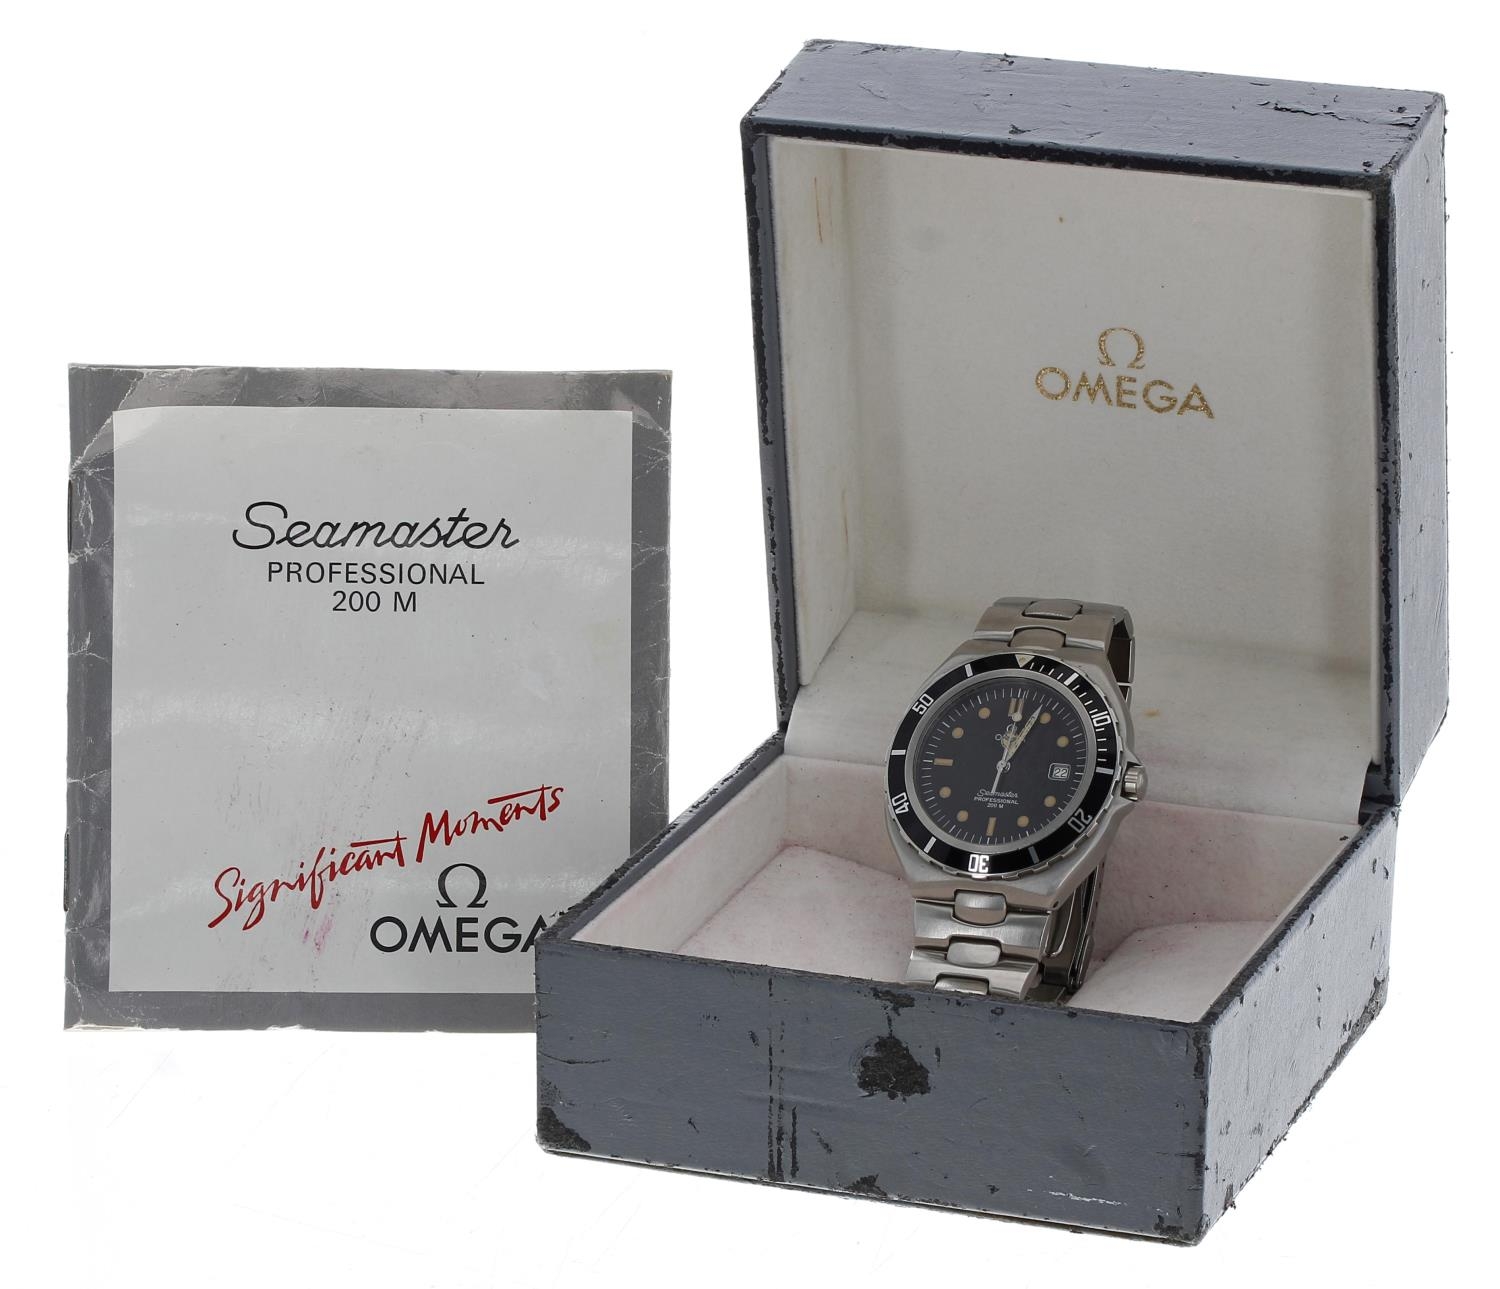 Omega Seamaster 300 200 M Professional stainless steel gentleman's wristwatch, reference no. 396 - Image 2 of 3